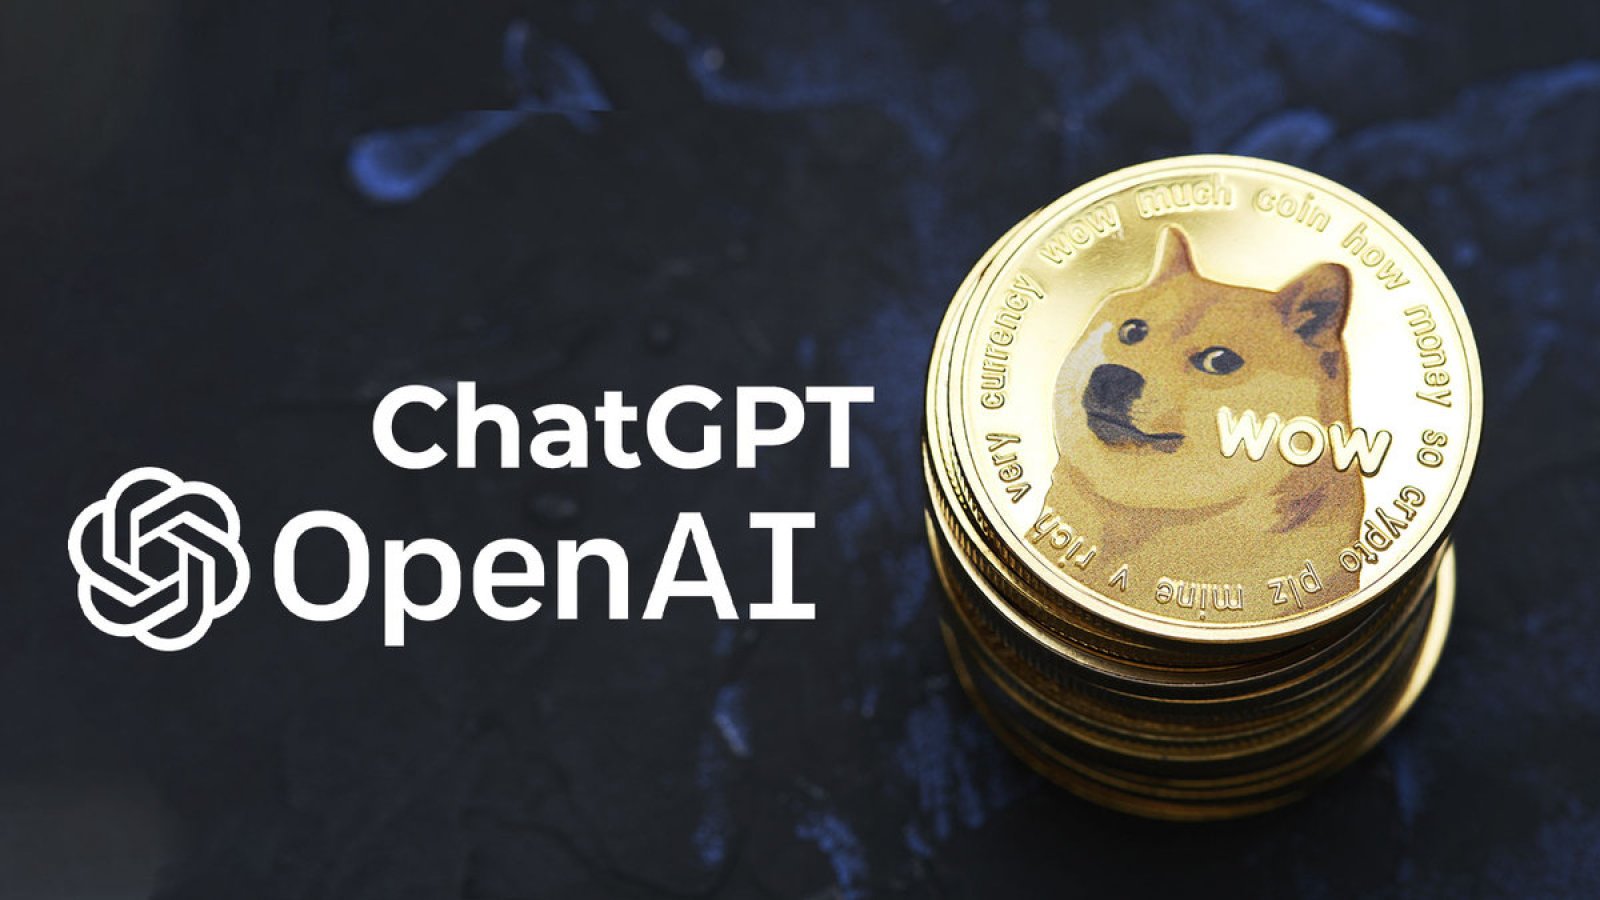 Dogecoin Copycat Created by Overhyped AI ChatGPT